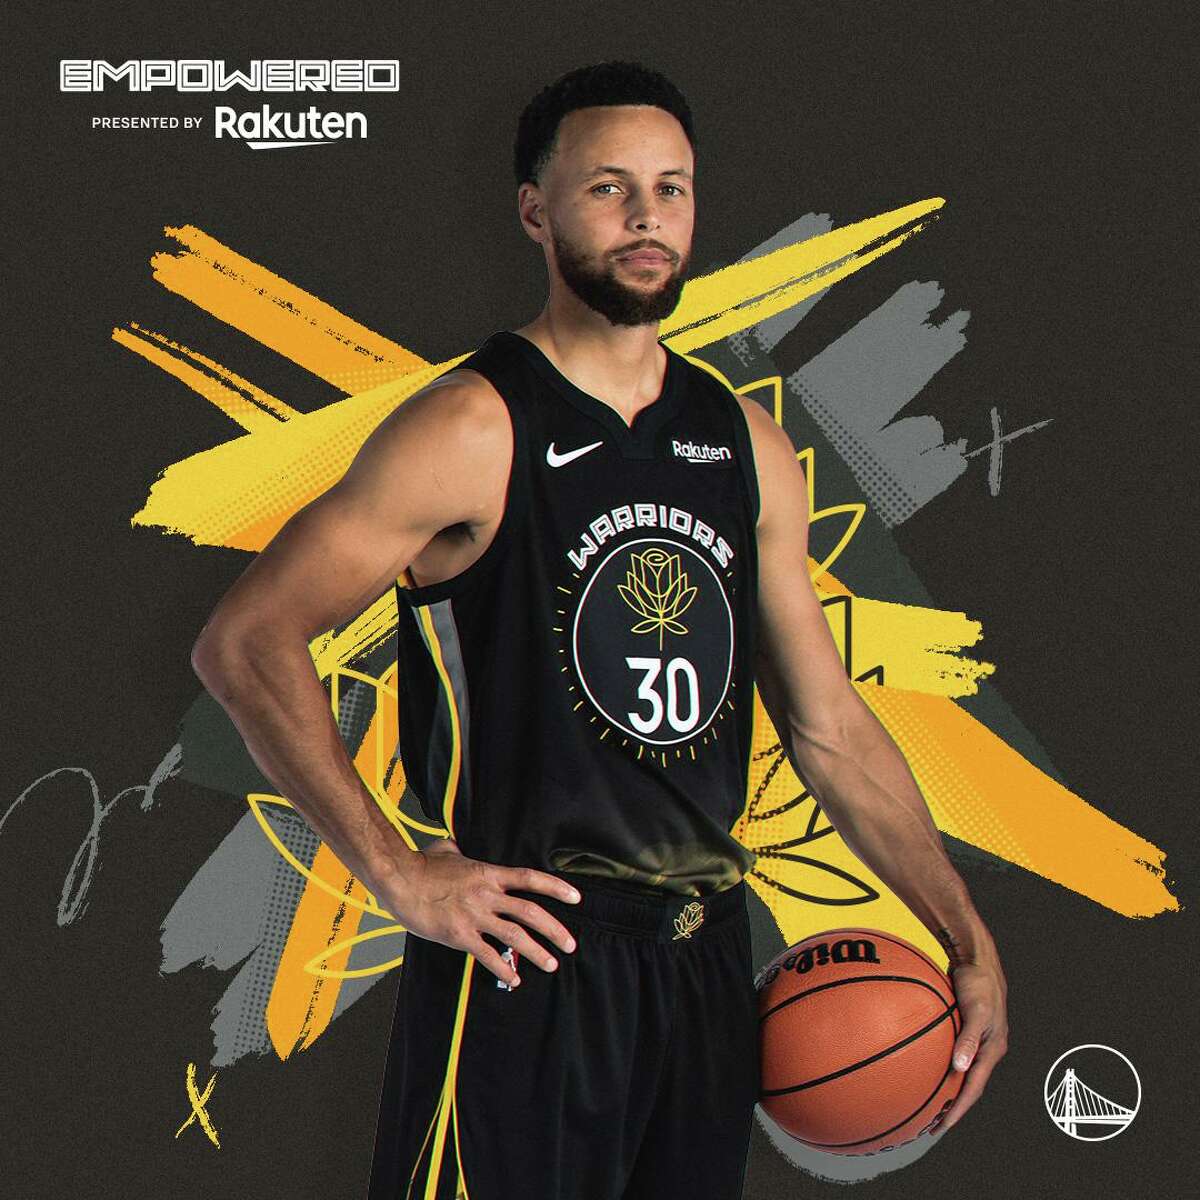 Stephen Curry models the Golden State Warriors’ new City edition uniform for this season. The look, featuring a yellow- gold rose inside the middle logo, was designed by Bay Area artist Allison Hueman.